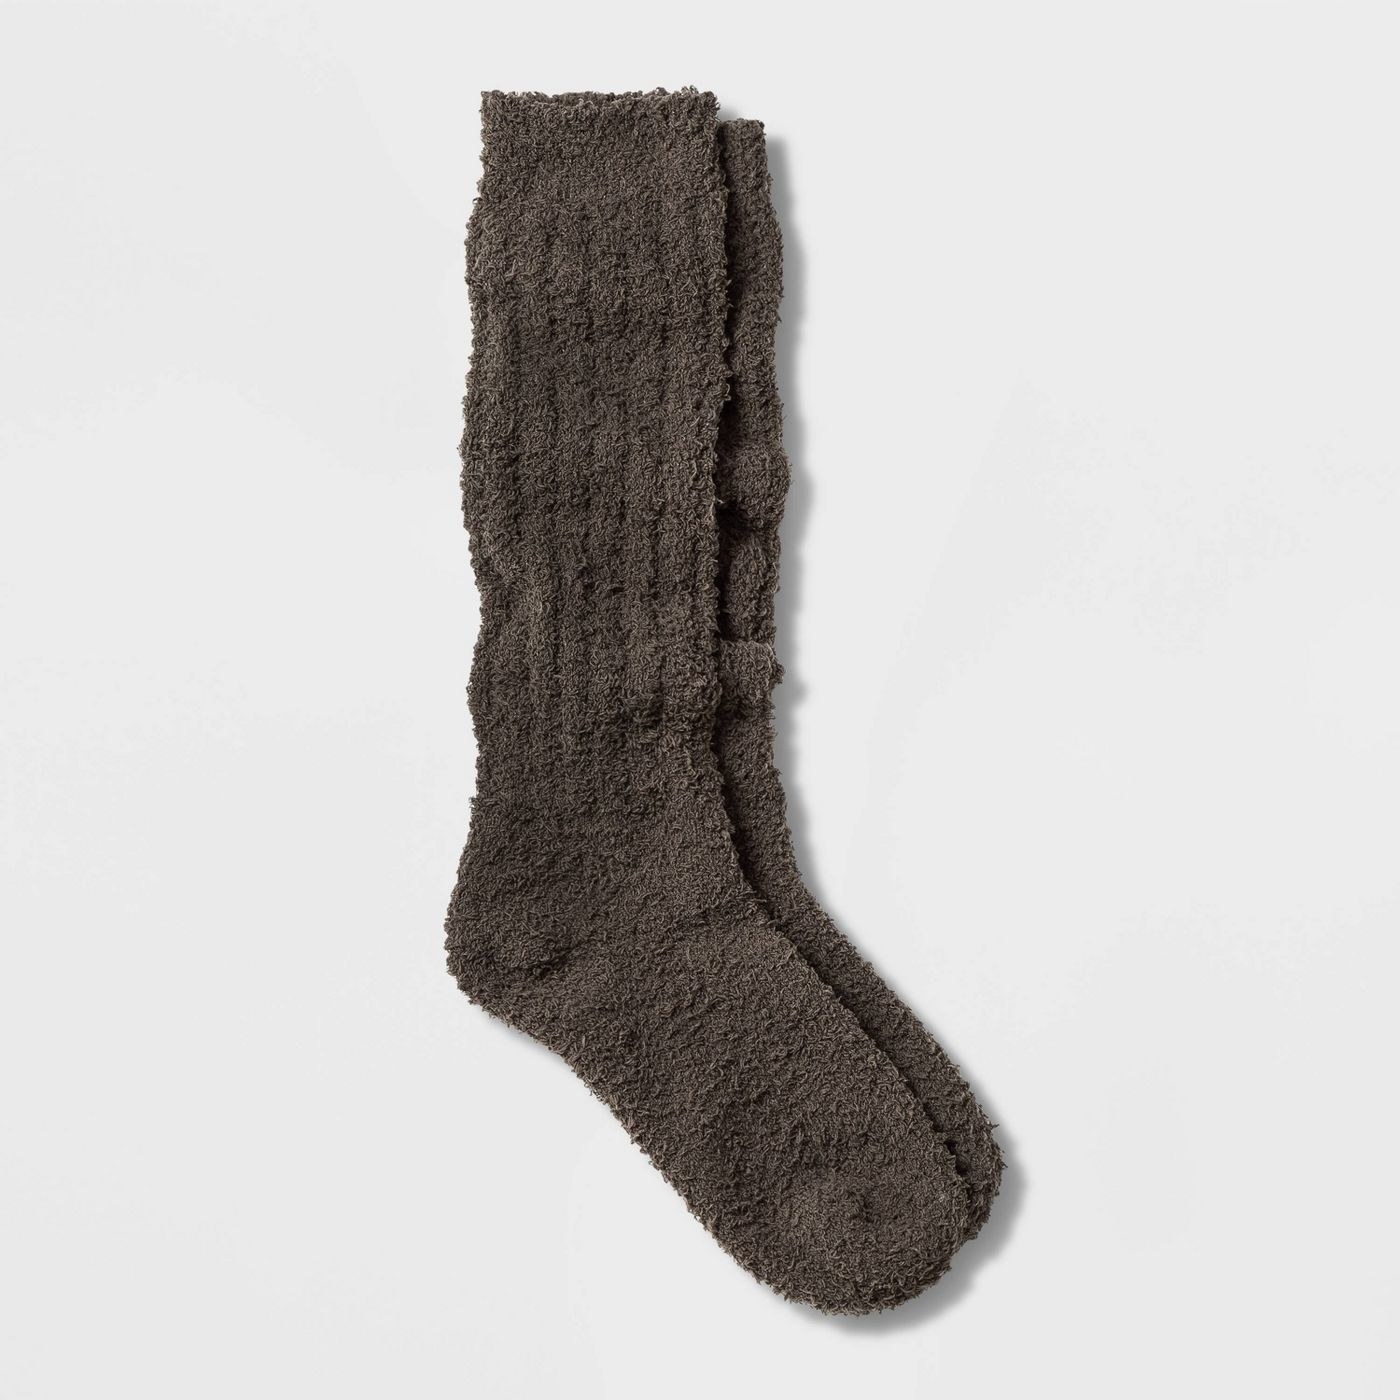 A pair of charcoal slouchy fuzzy socks